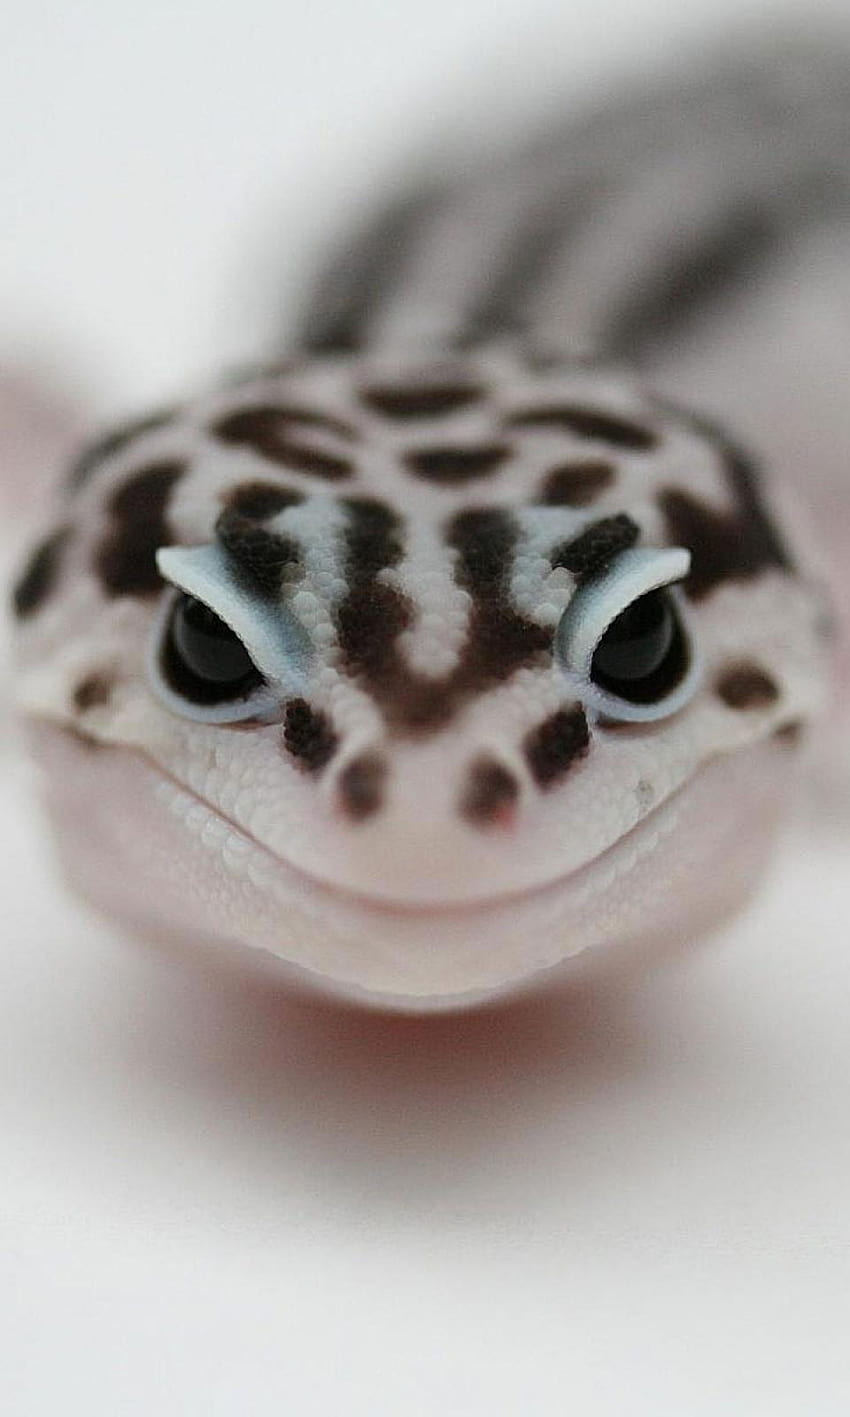 Gecko 4K wallpapers for your desktop or mobile screen free and easy to  download